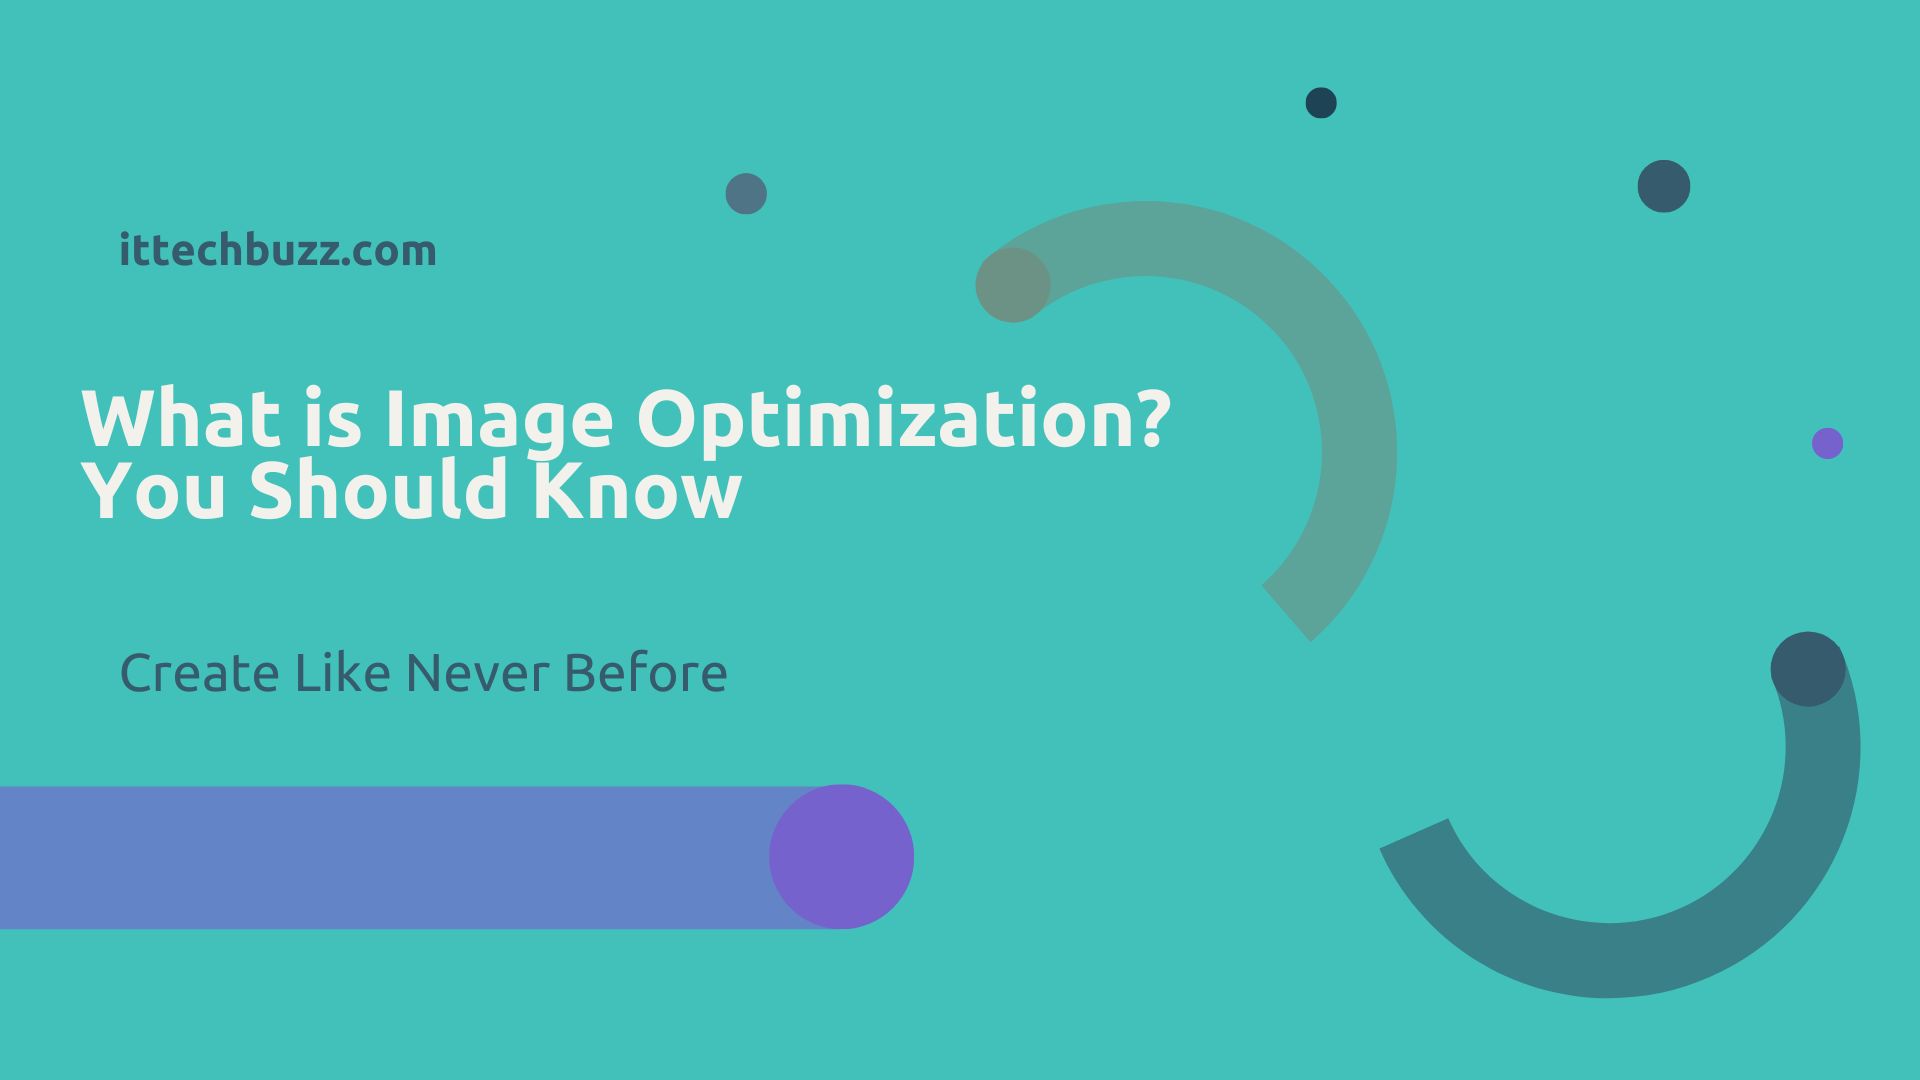 What is Image Optimization? You Should Know